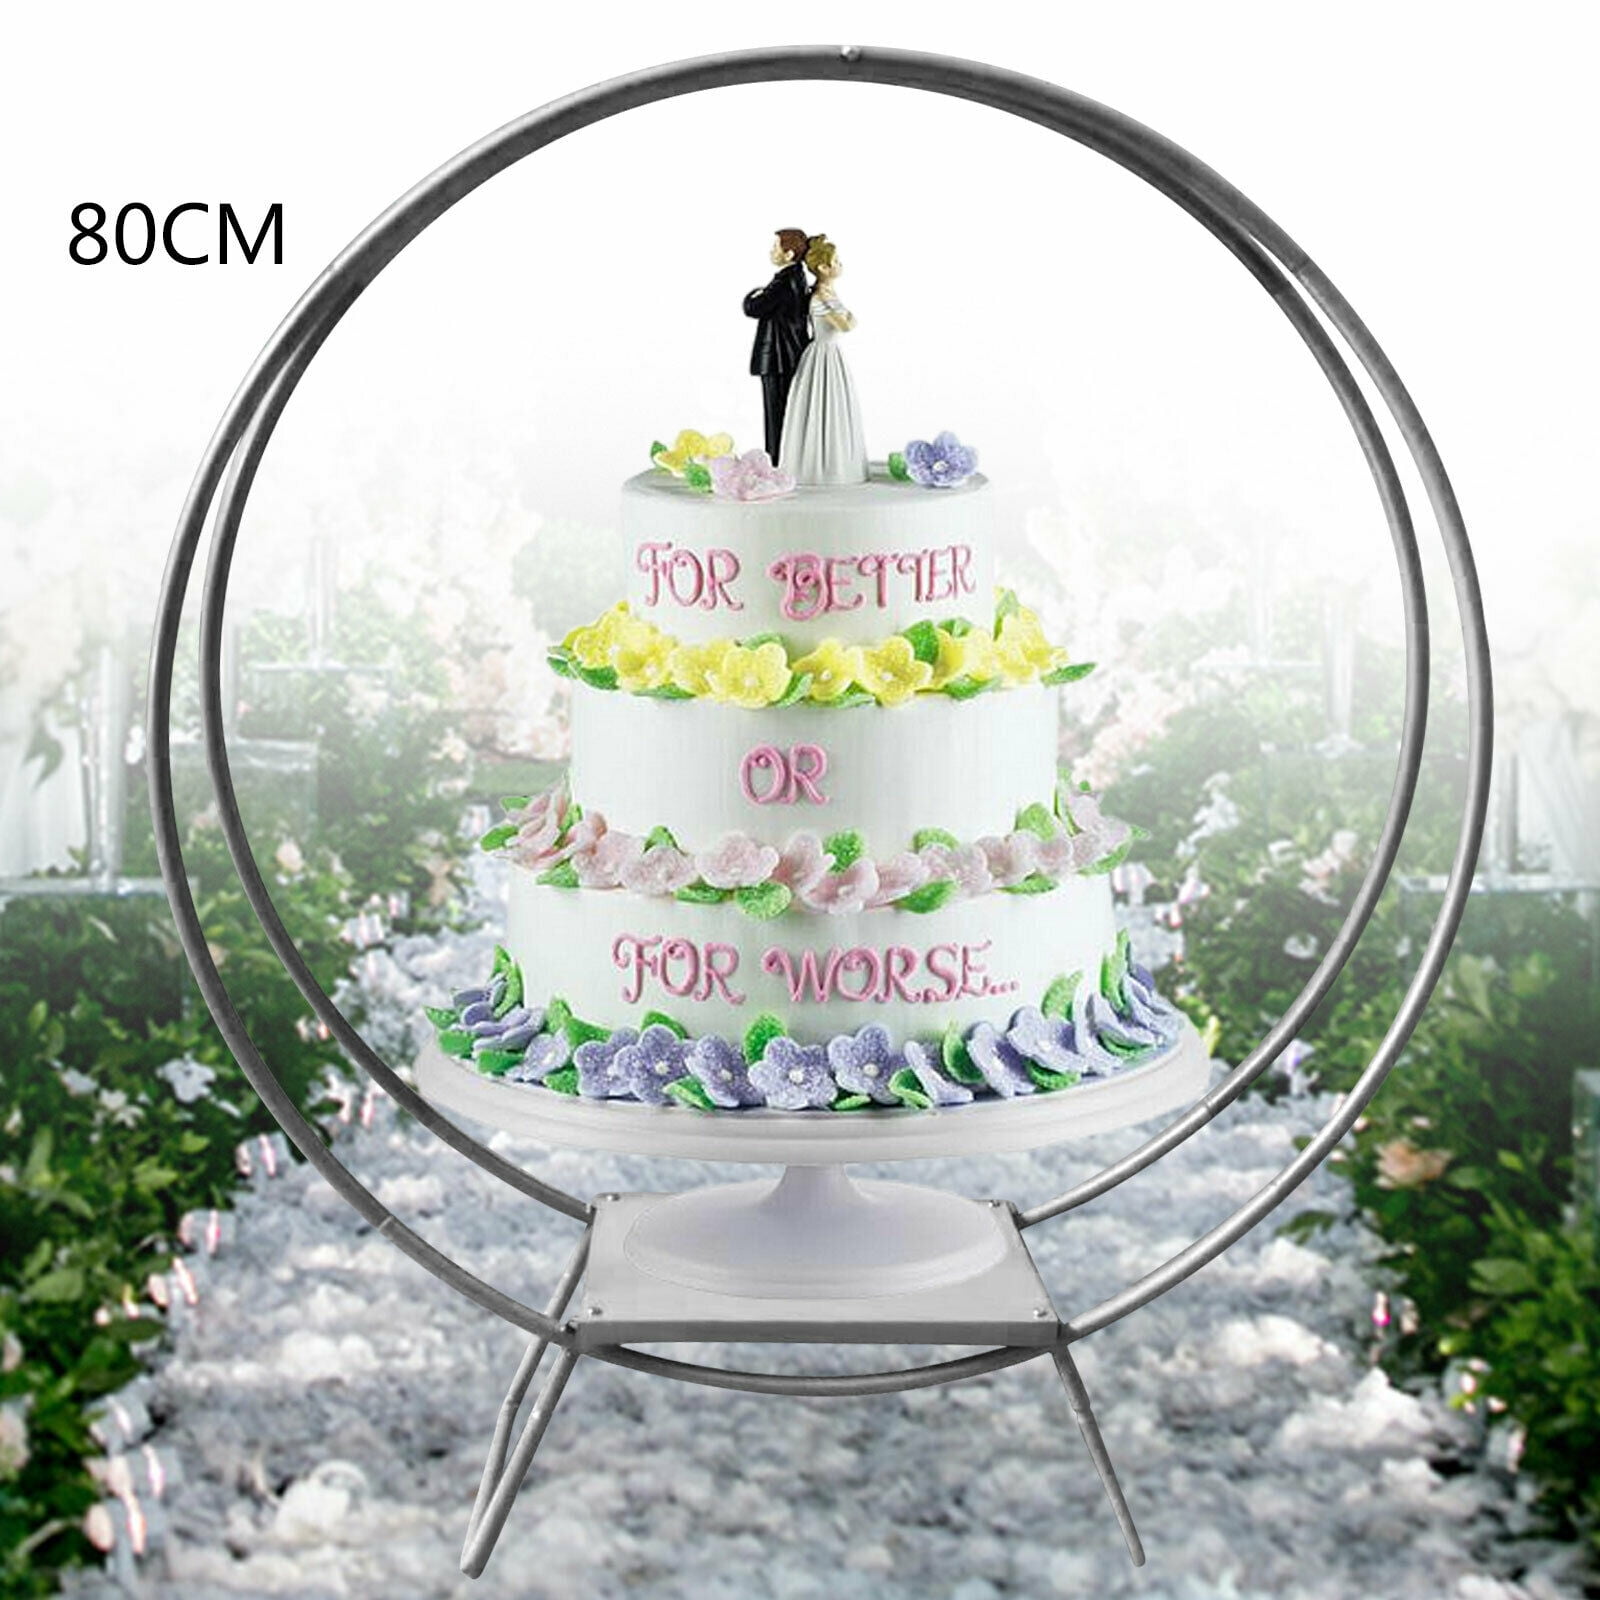 Gdrasuya10 80cm Gold Double Hoop Cake Stand Outdoor Flower Stand Arch Floral Hoop Circle Decor for Party Lawn Celebration Wedding Photography 